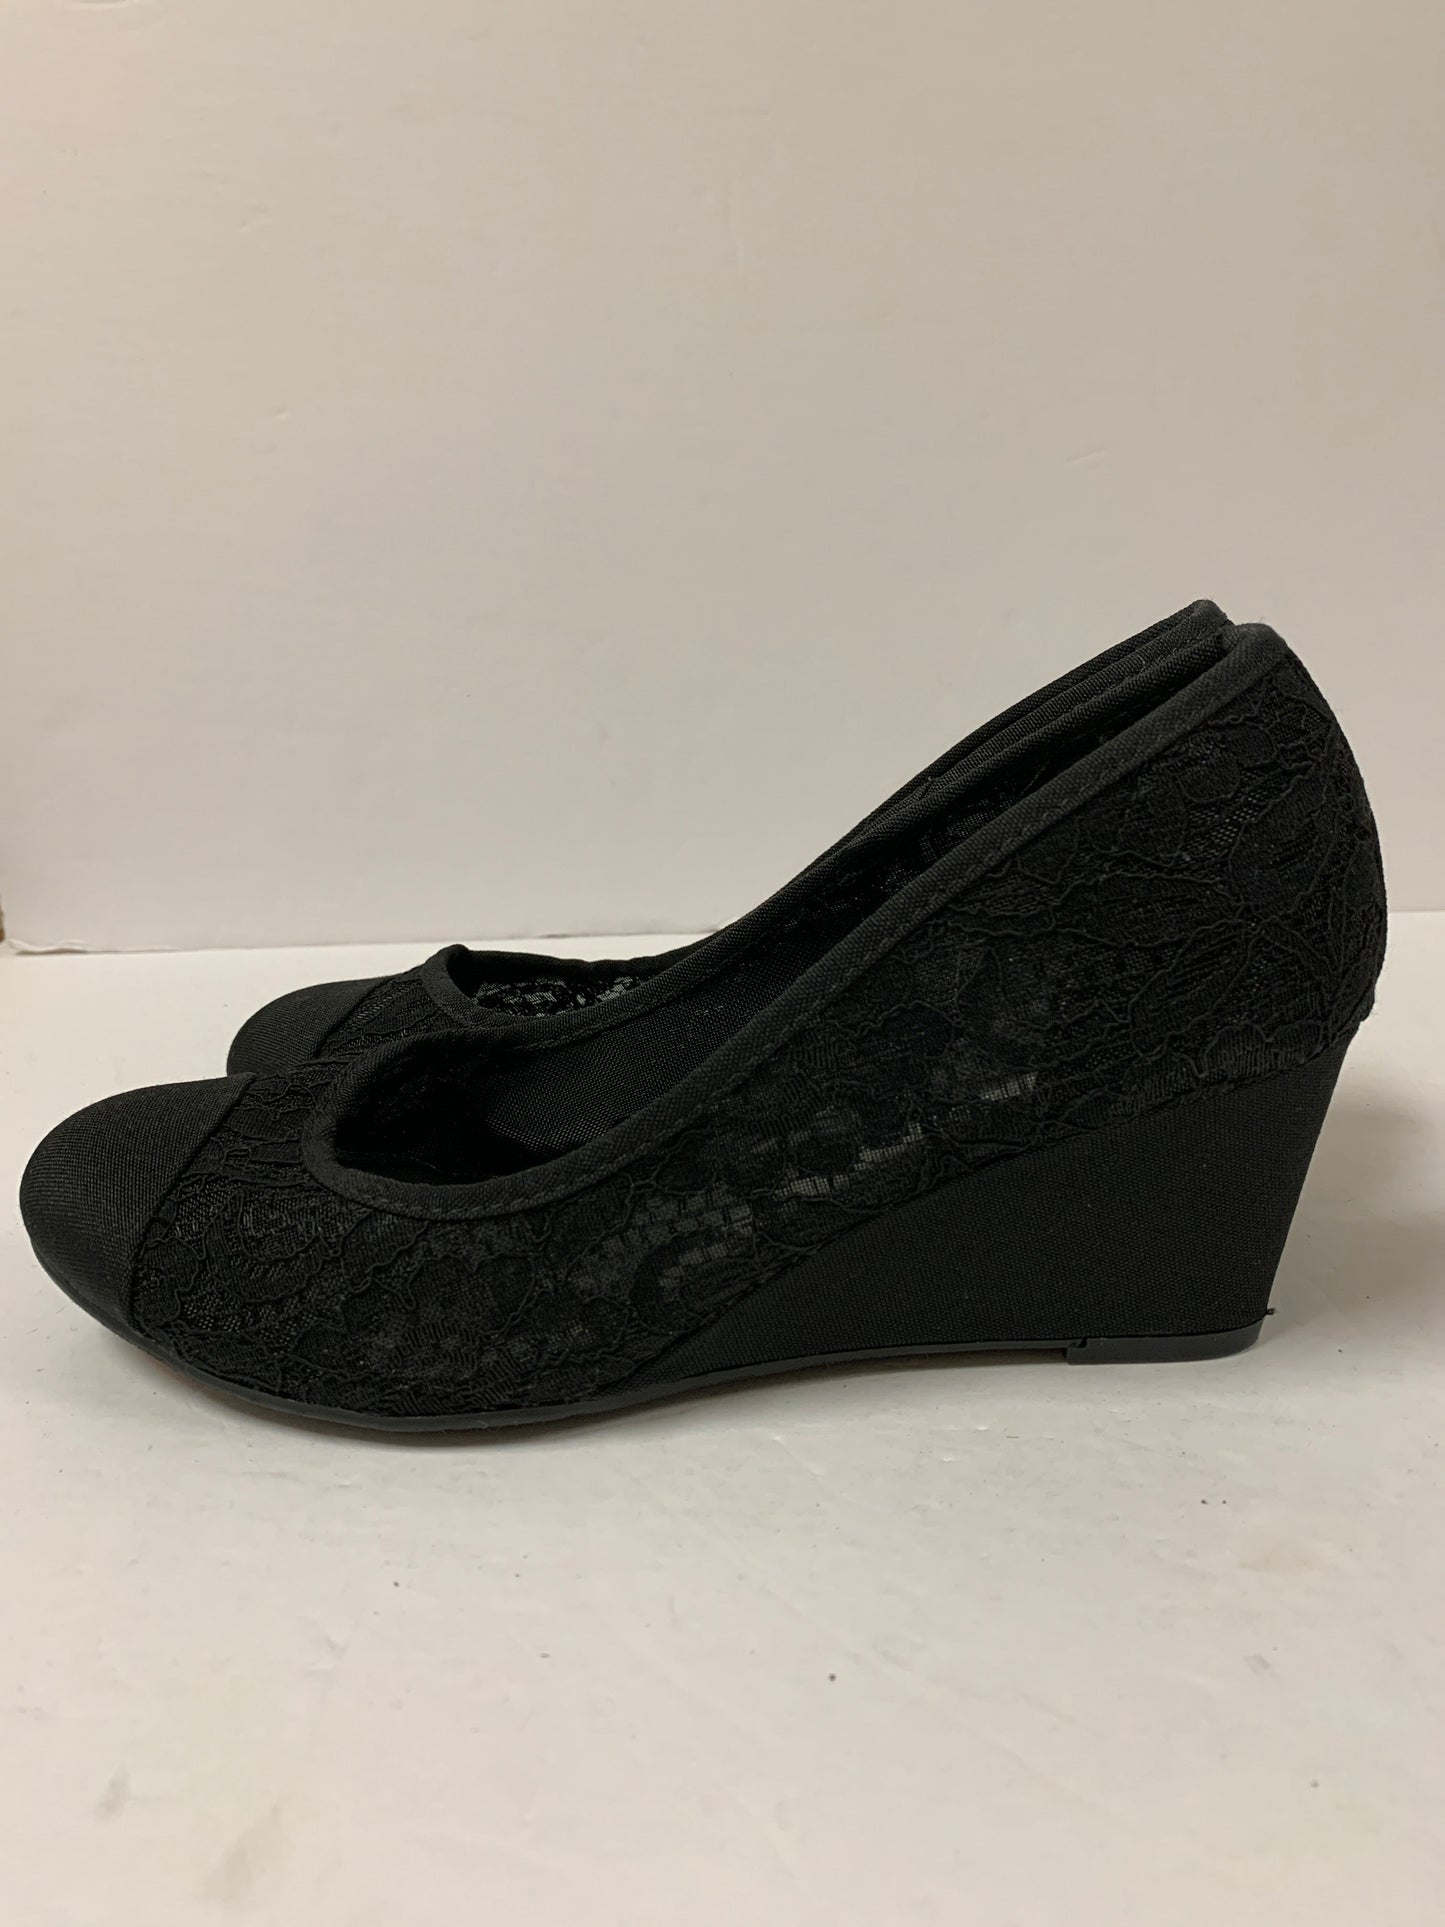 Shoes Heels Wedge By Seychelles  Size: 7.5